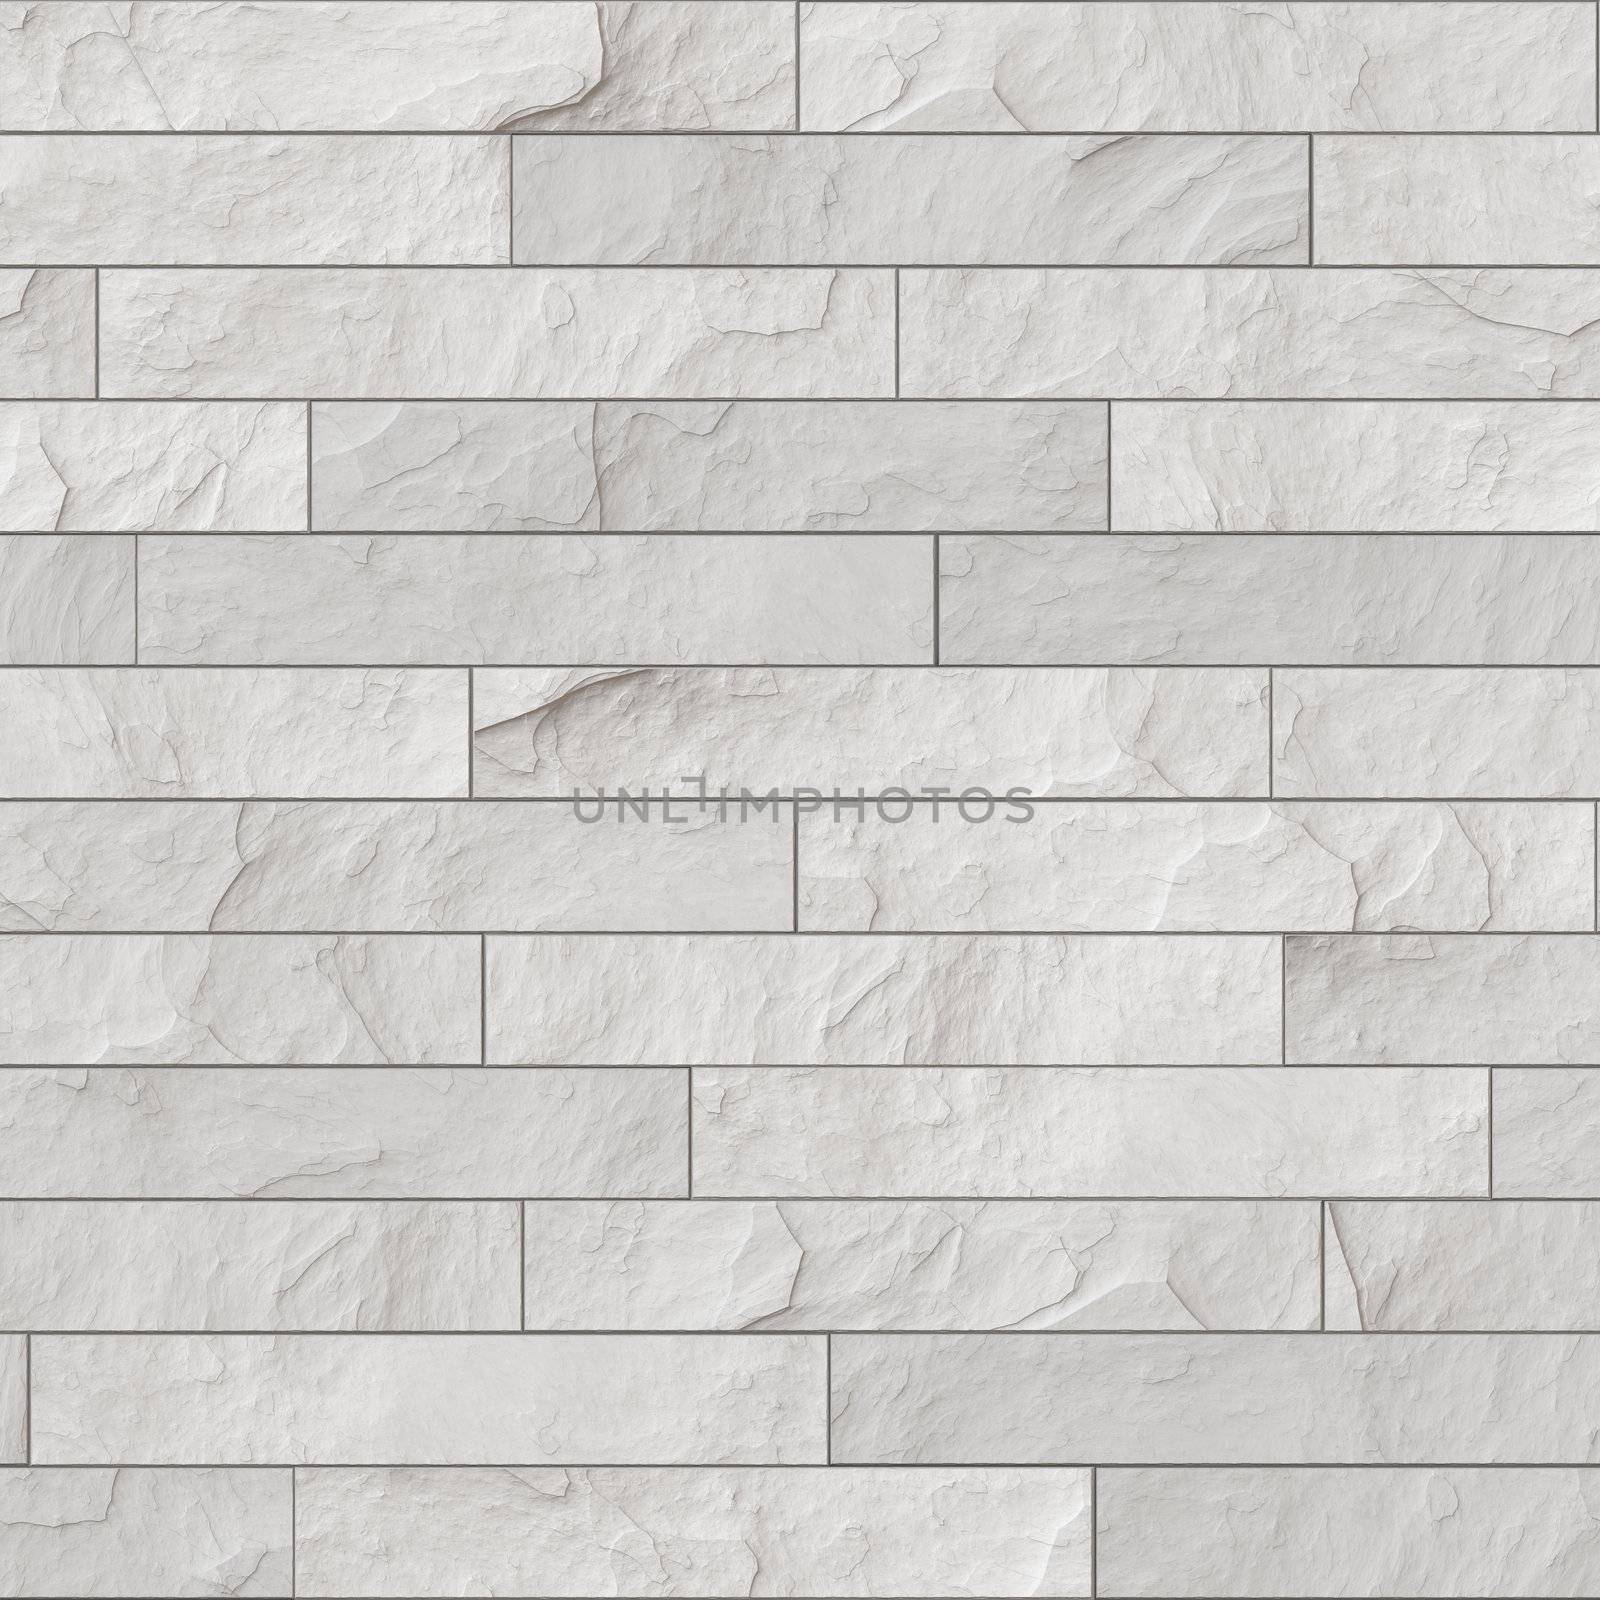 An illustration of a seamless white brick wall